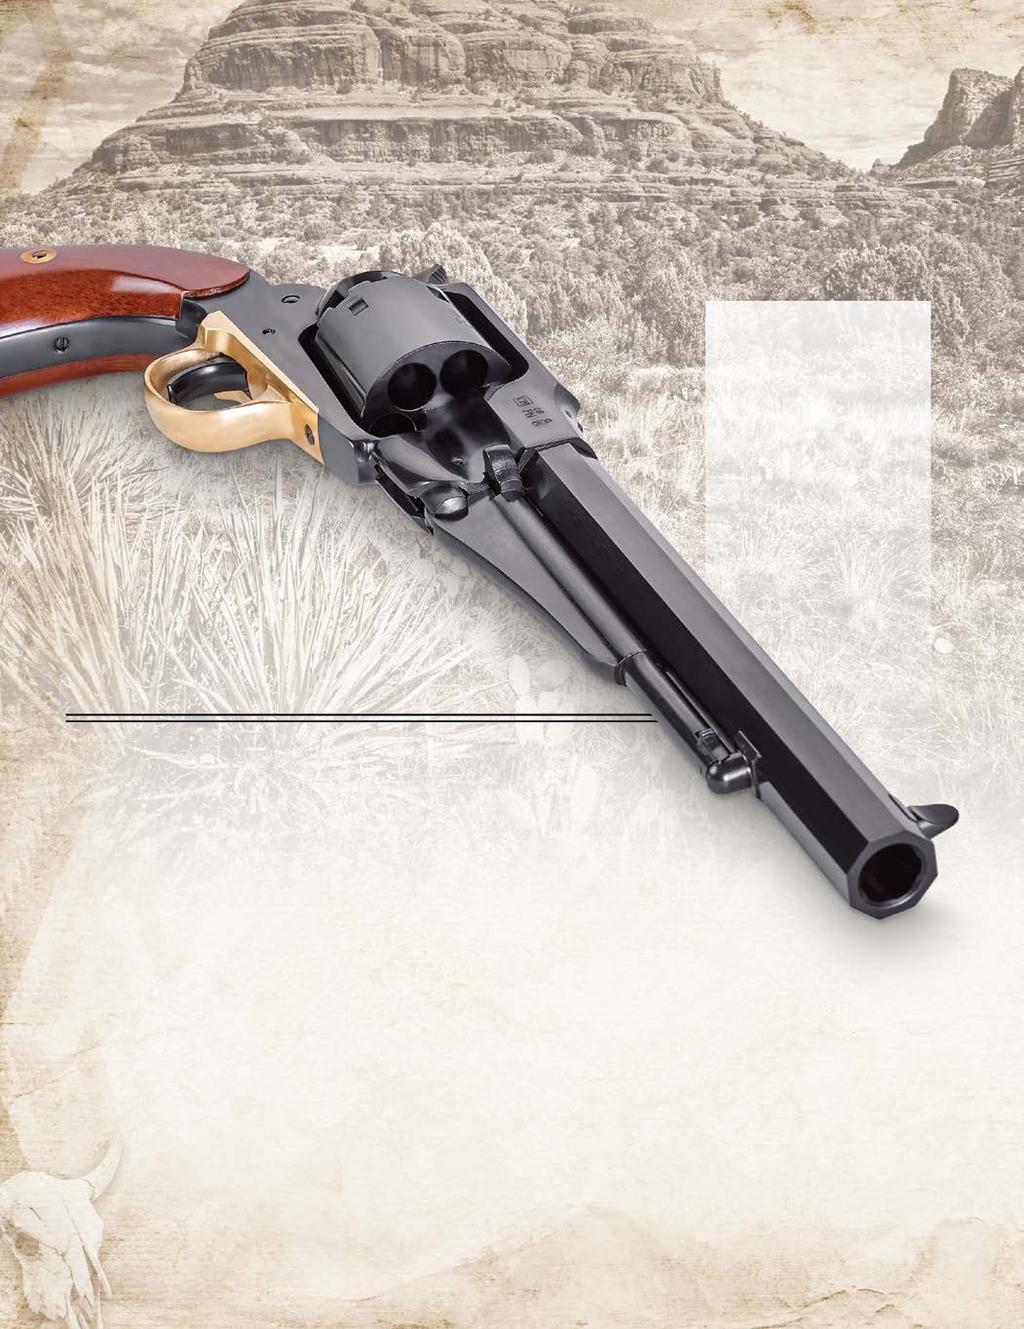 BLACK POWDER REVOLVERS 1847 Walker Black Powder Revolver 1848 Dragoon (continued) 1858 NEW ARMY (See page 5) EXCLUSIVELY ON UBERTI FIREARMS